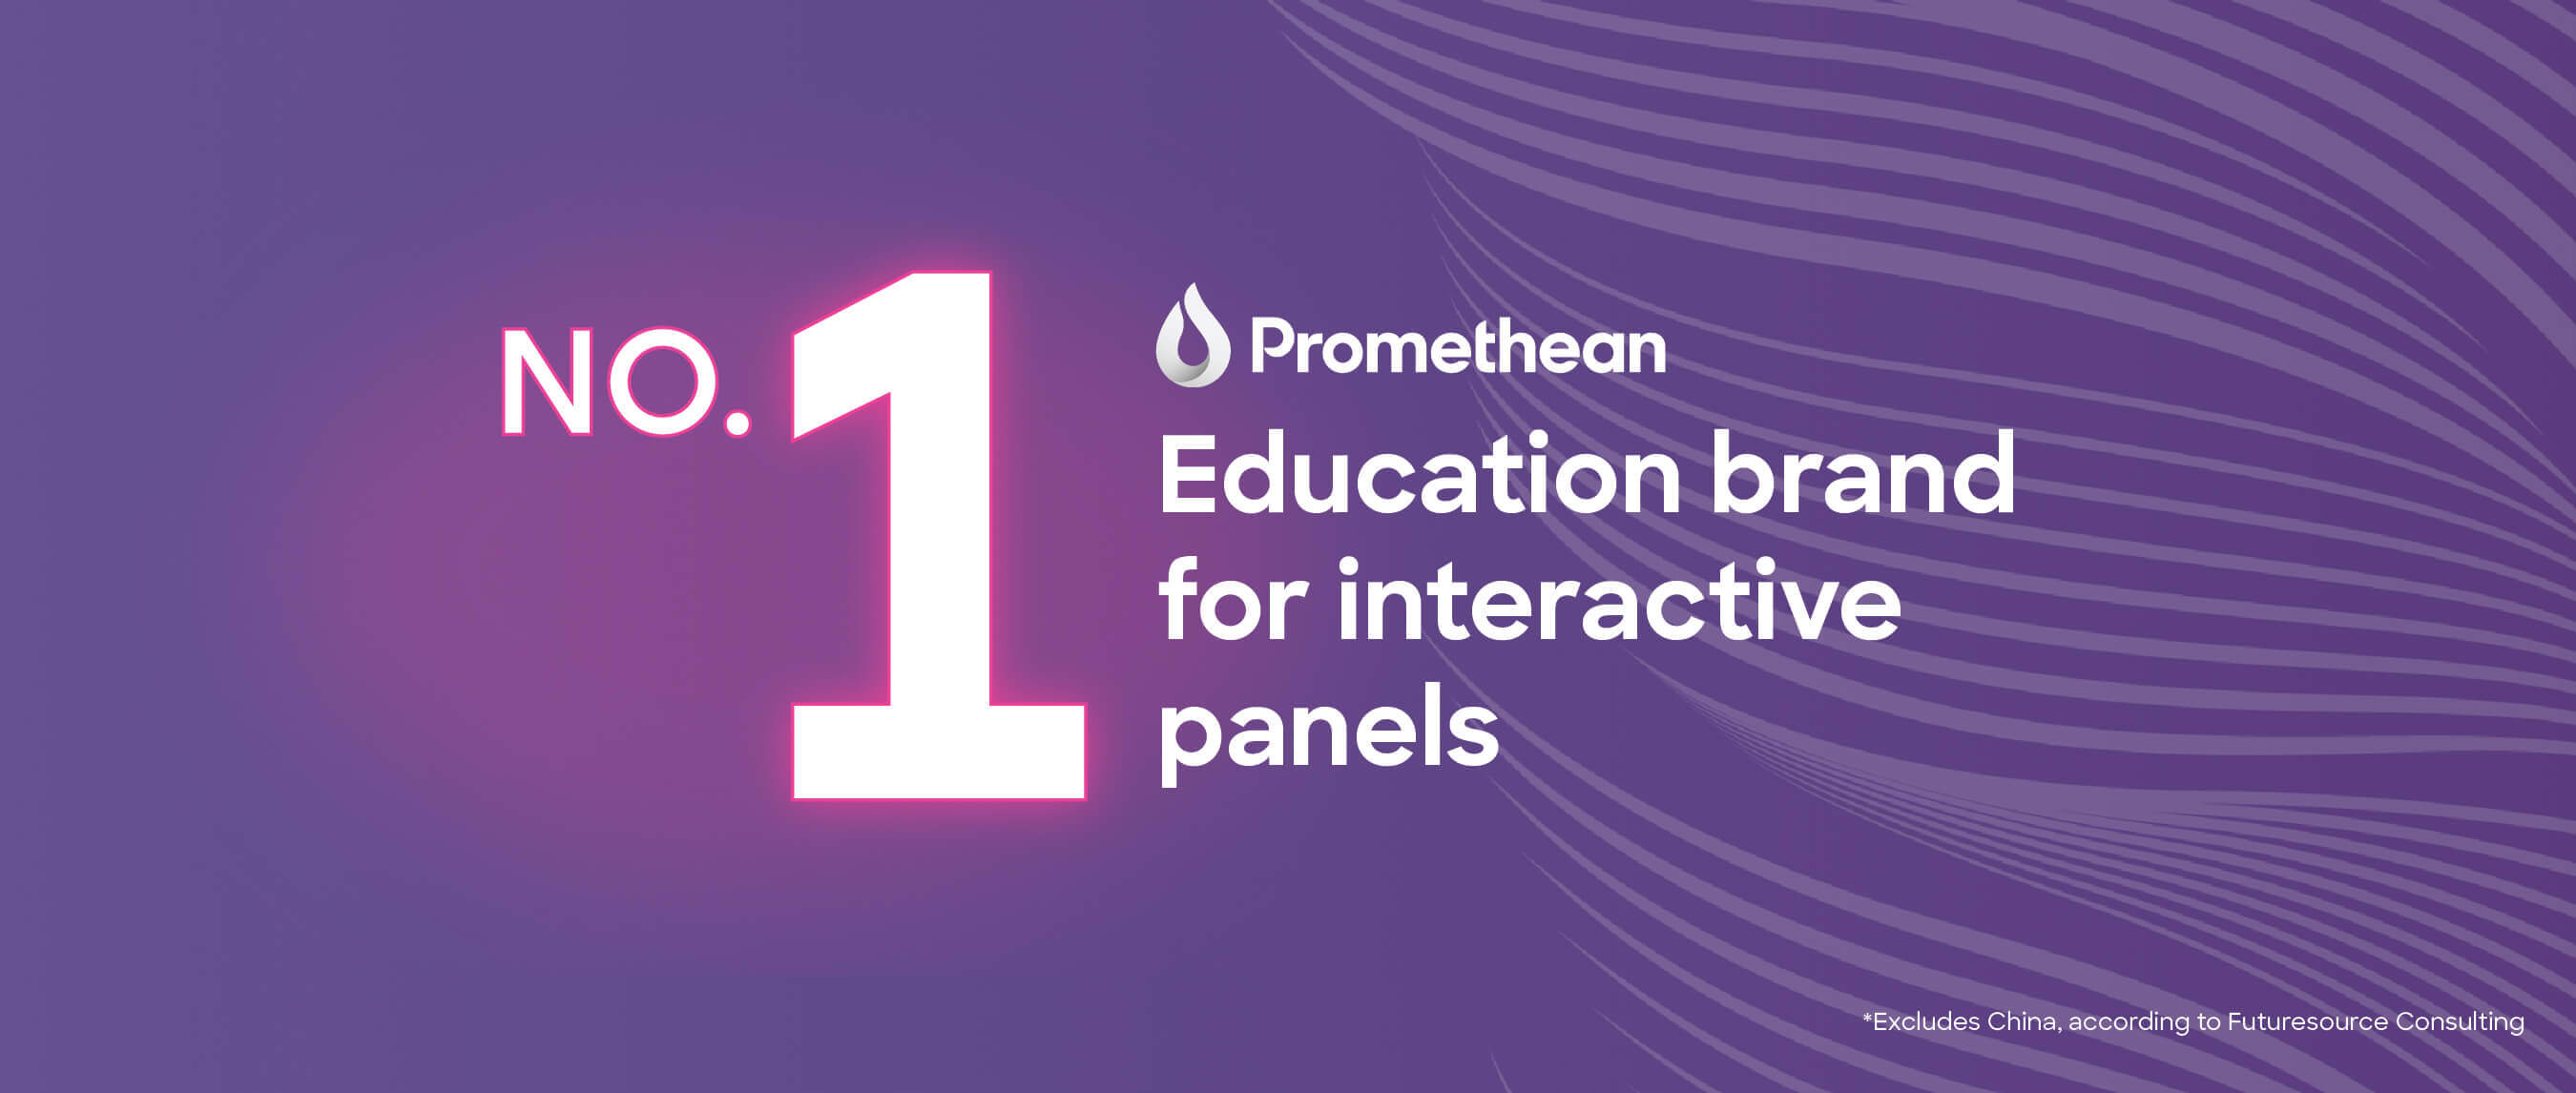 Mynd.ai’s Promethean brand named the global leader in IFPDs for education in the fourth quarter of 2023